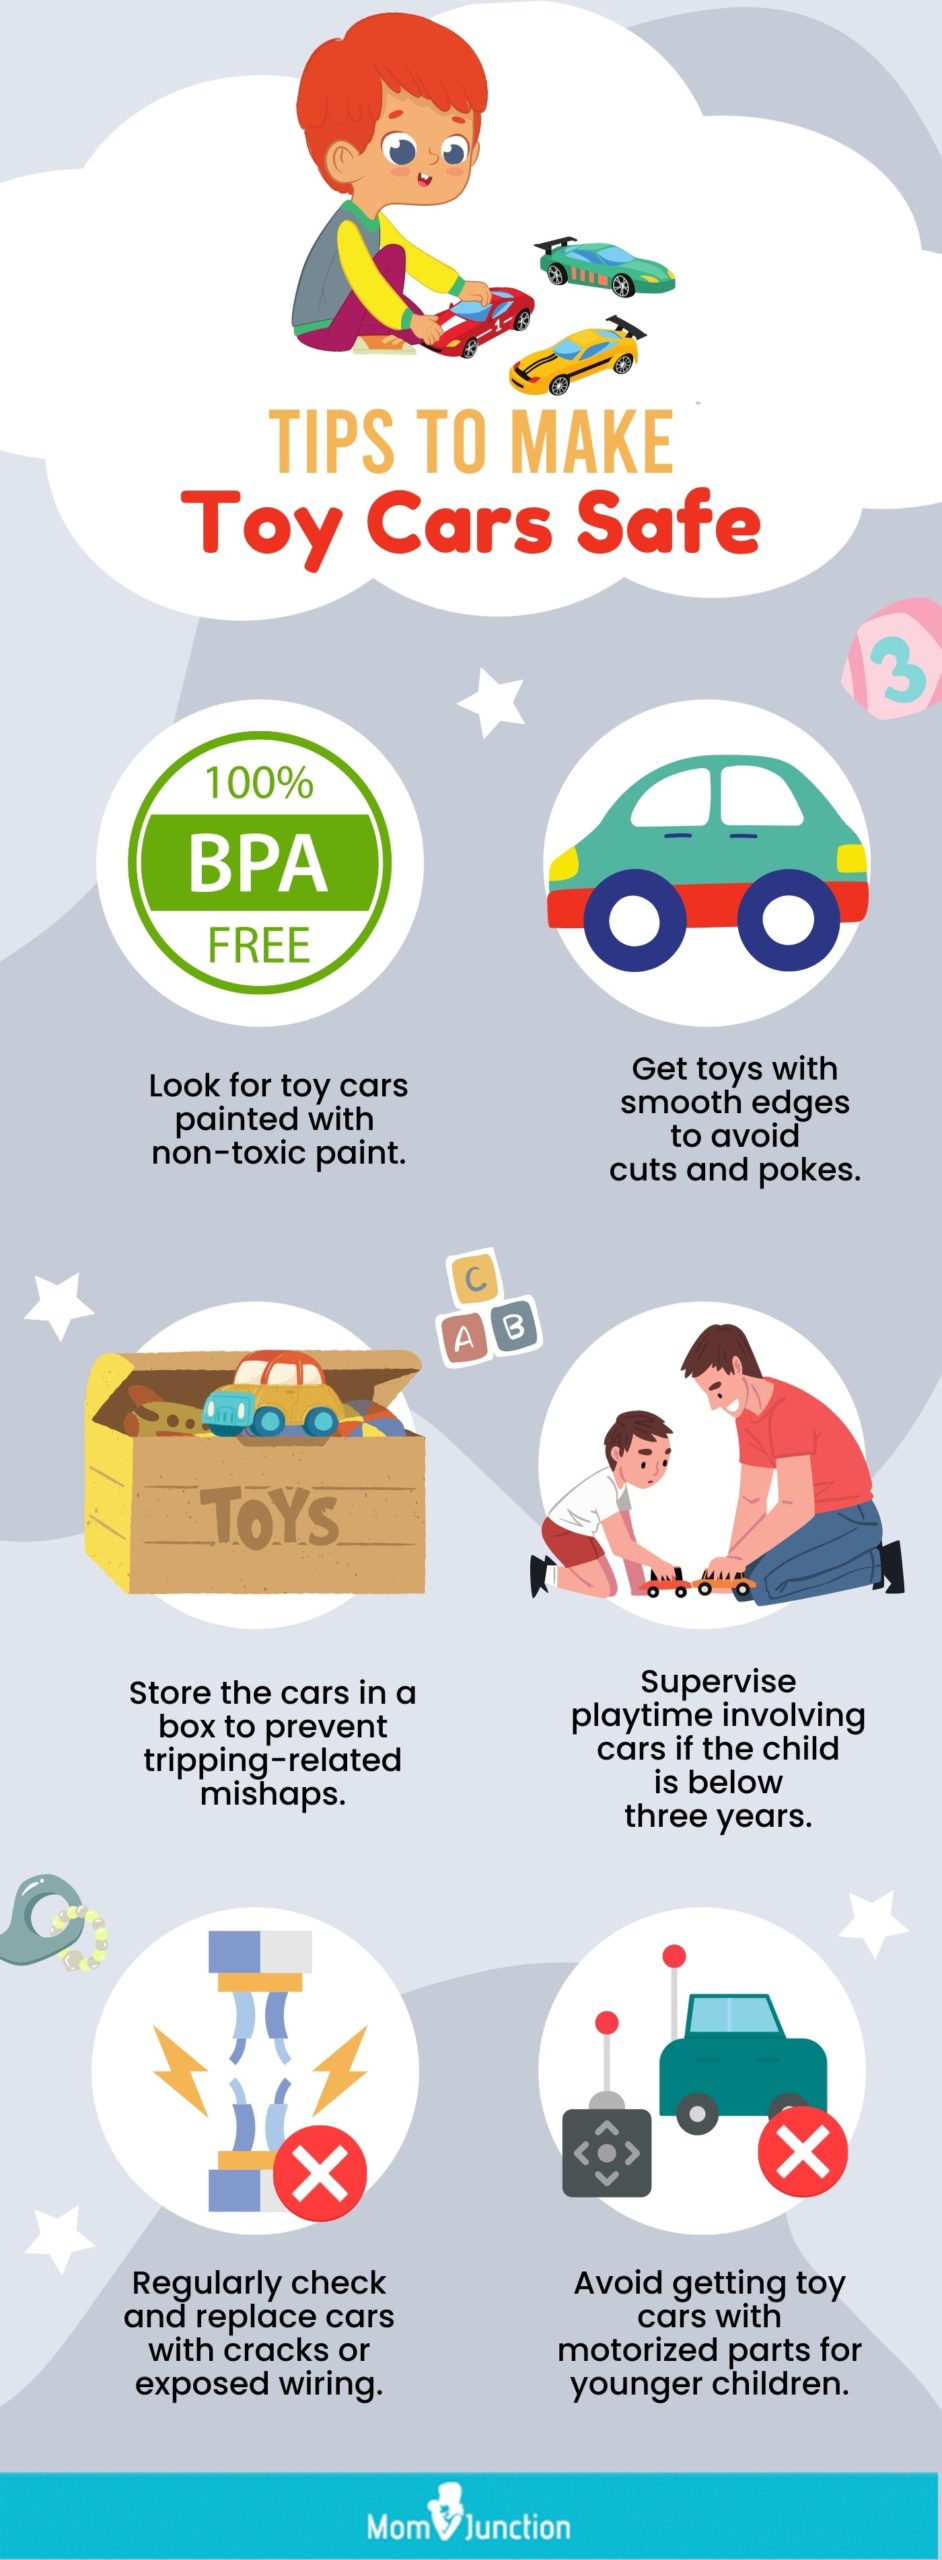 Tips to make toy cars safe (infographic)